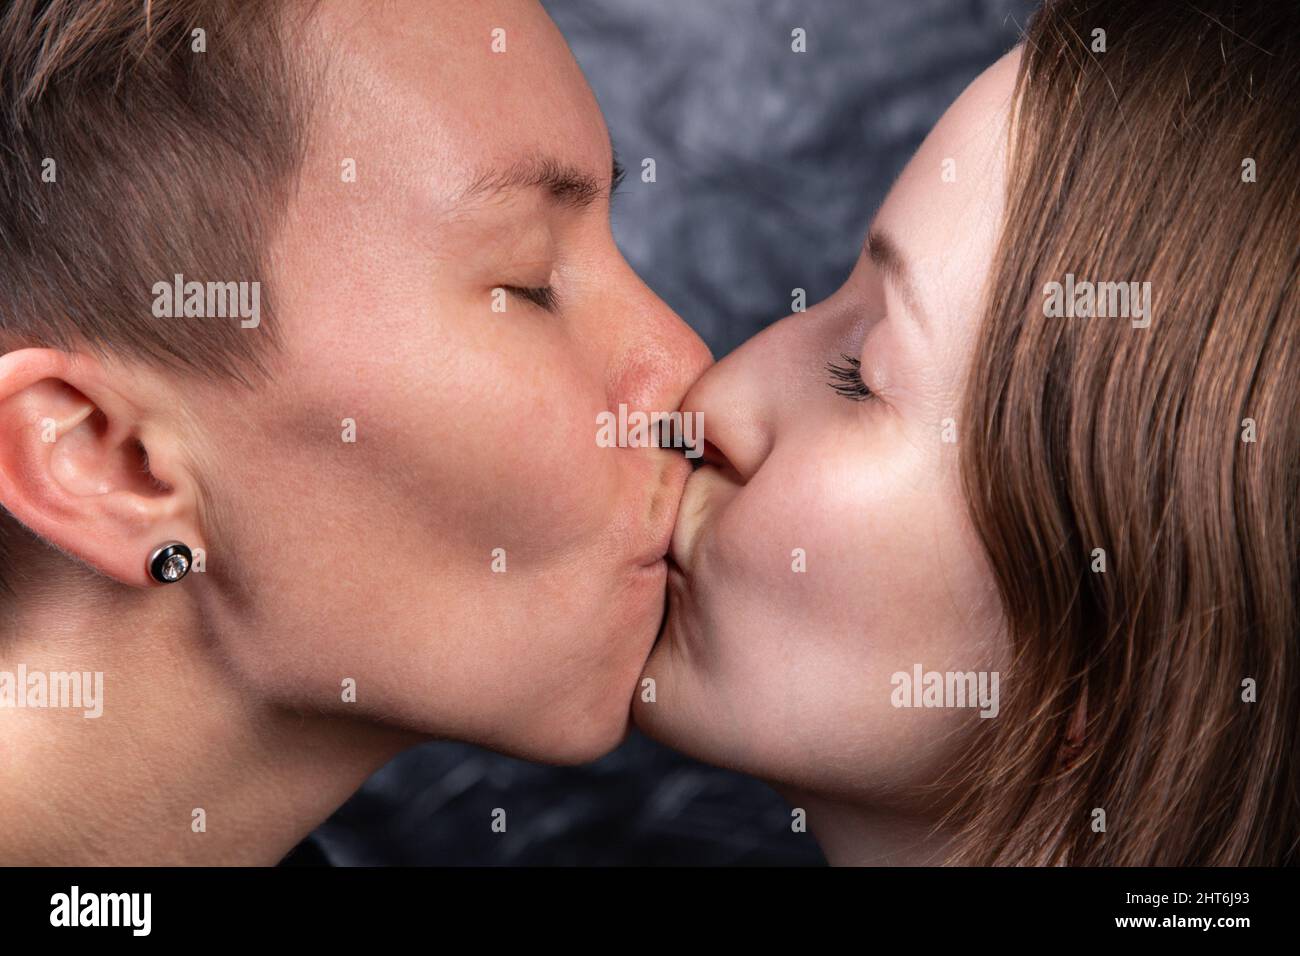 Photo of two kissing homosexual women, close-up Stock Photo